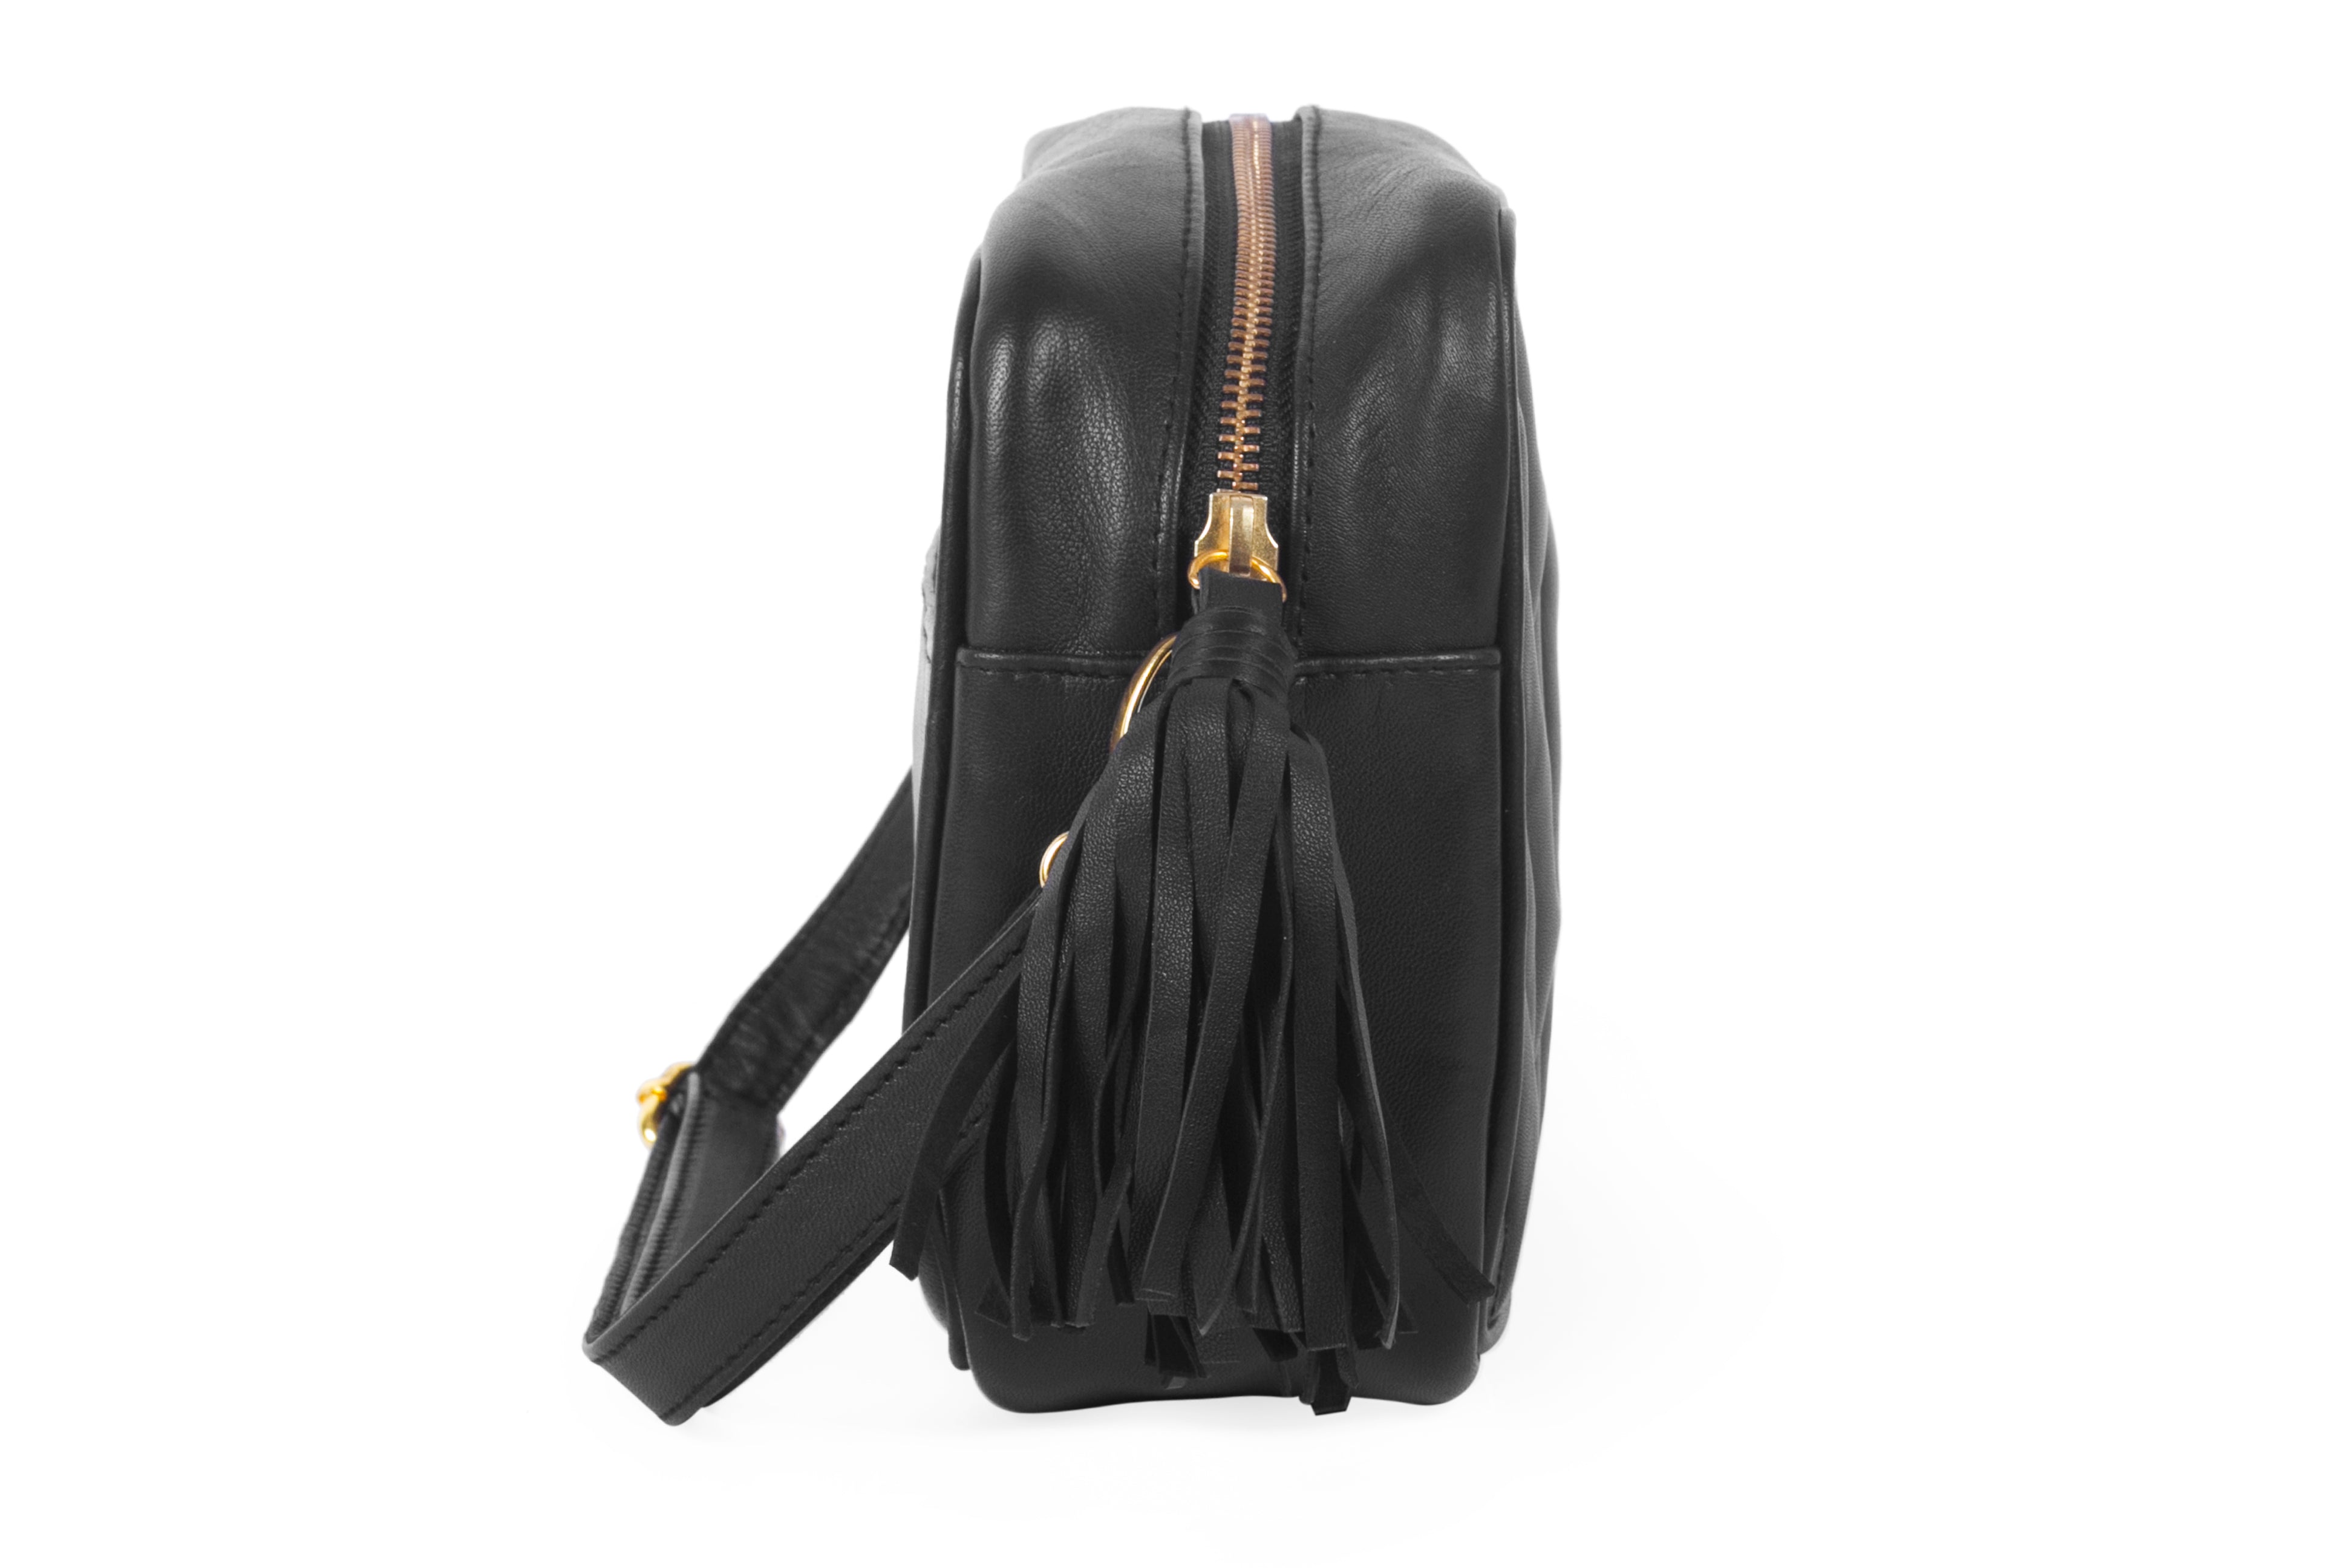 Sideview of Black leather crossbody camera bag